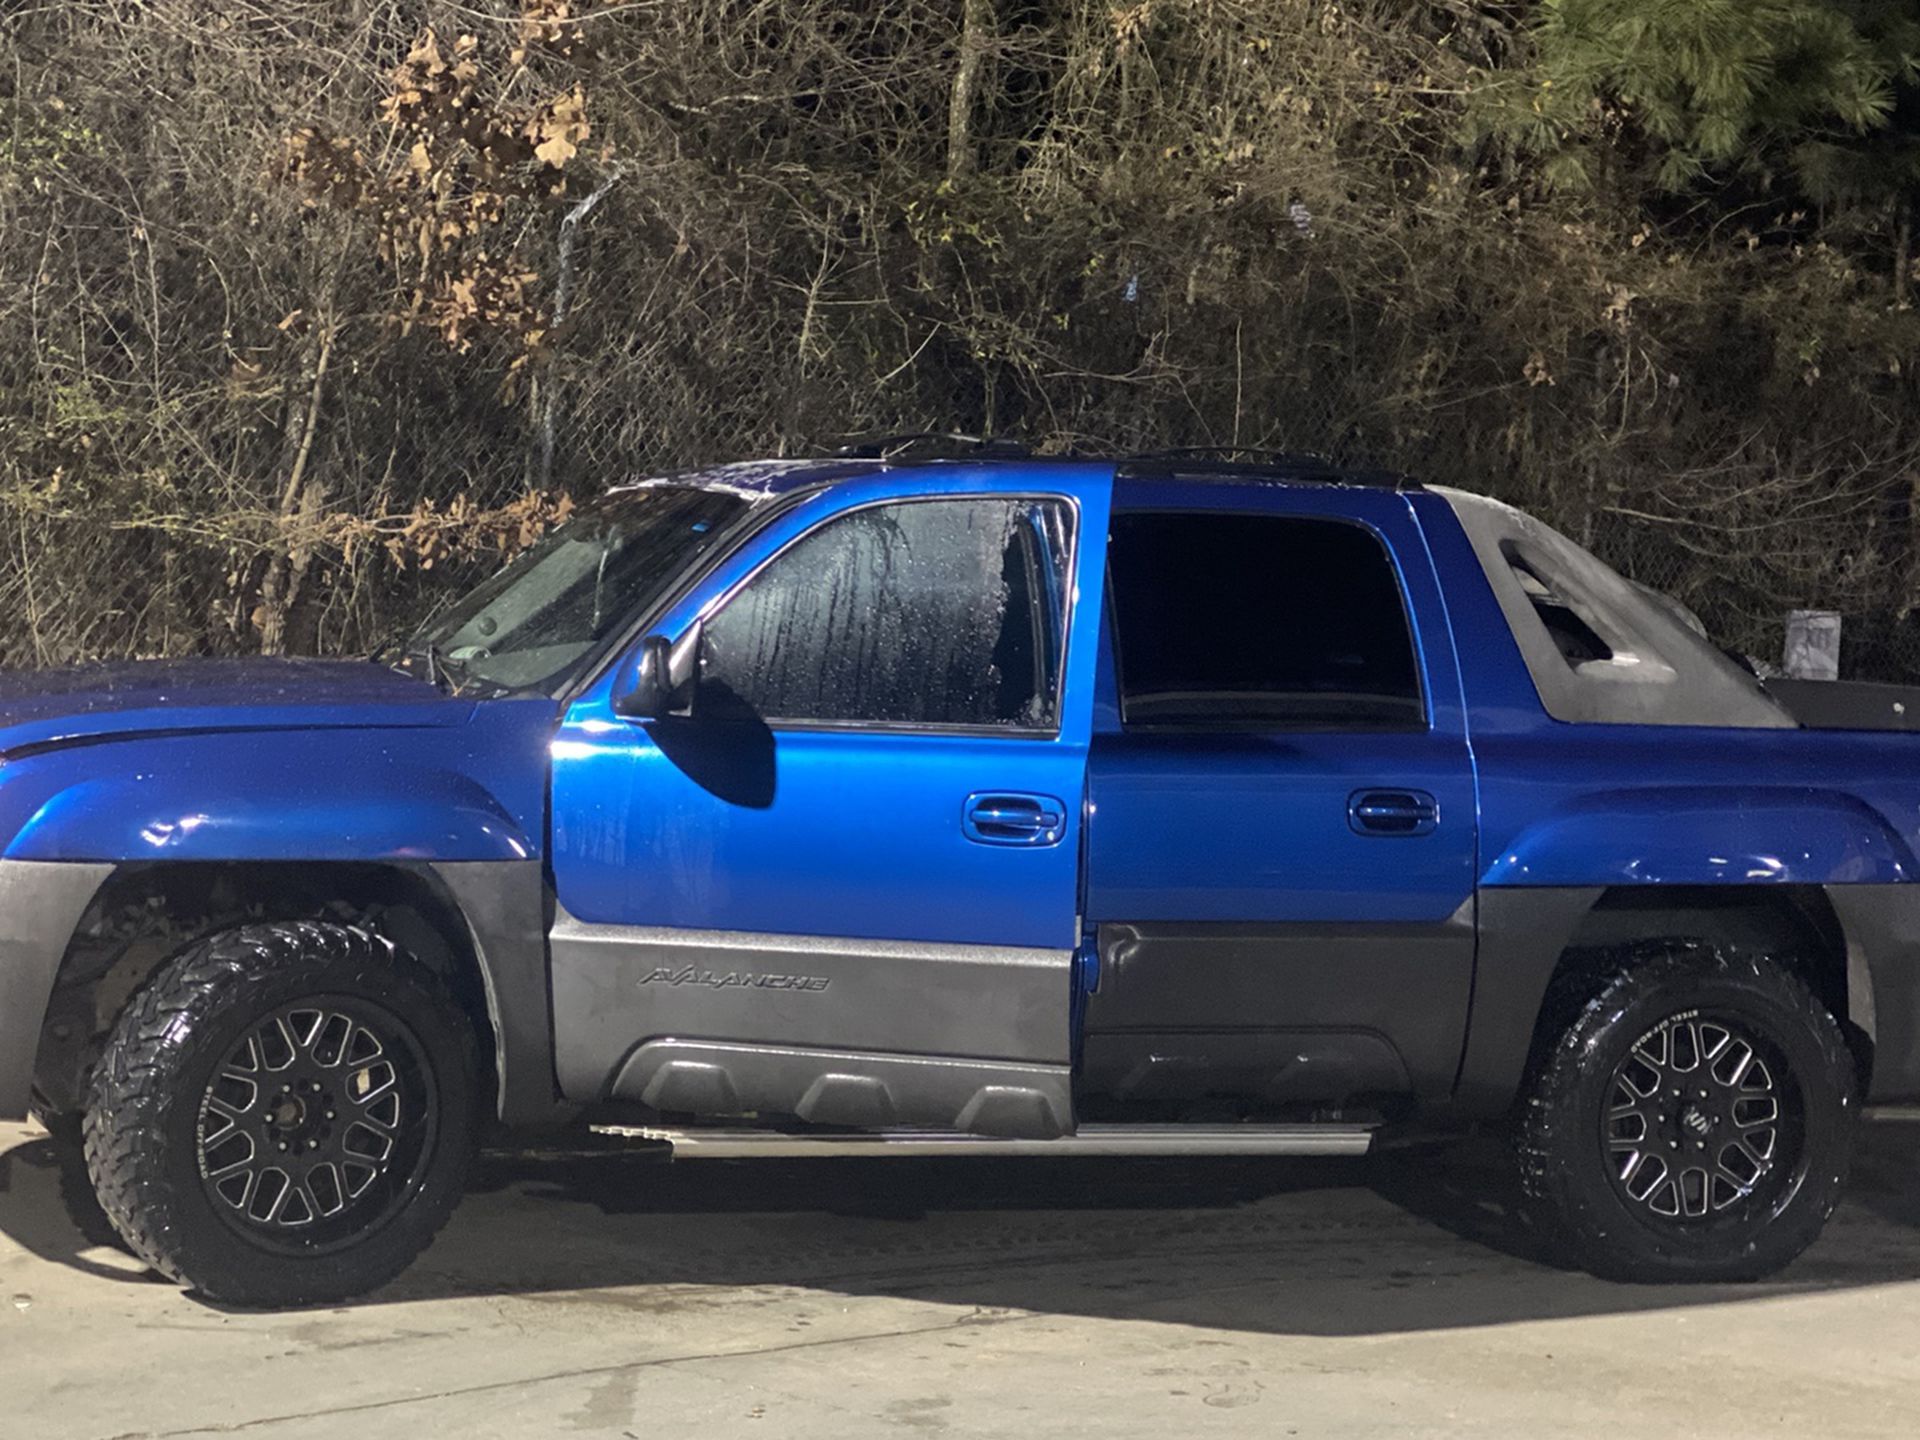 2004 chevy avalanche